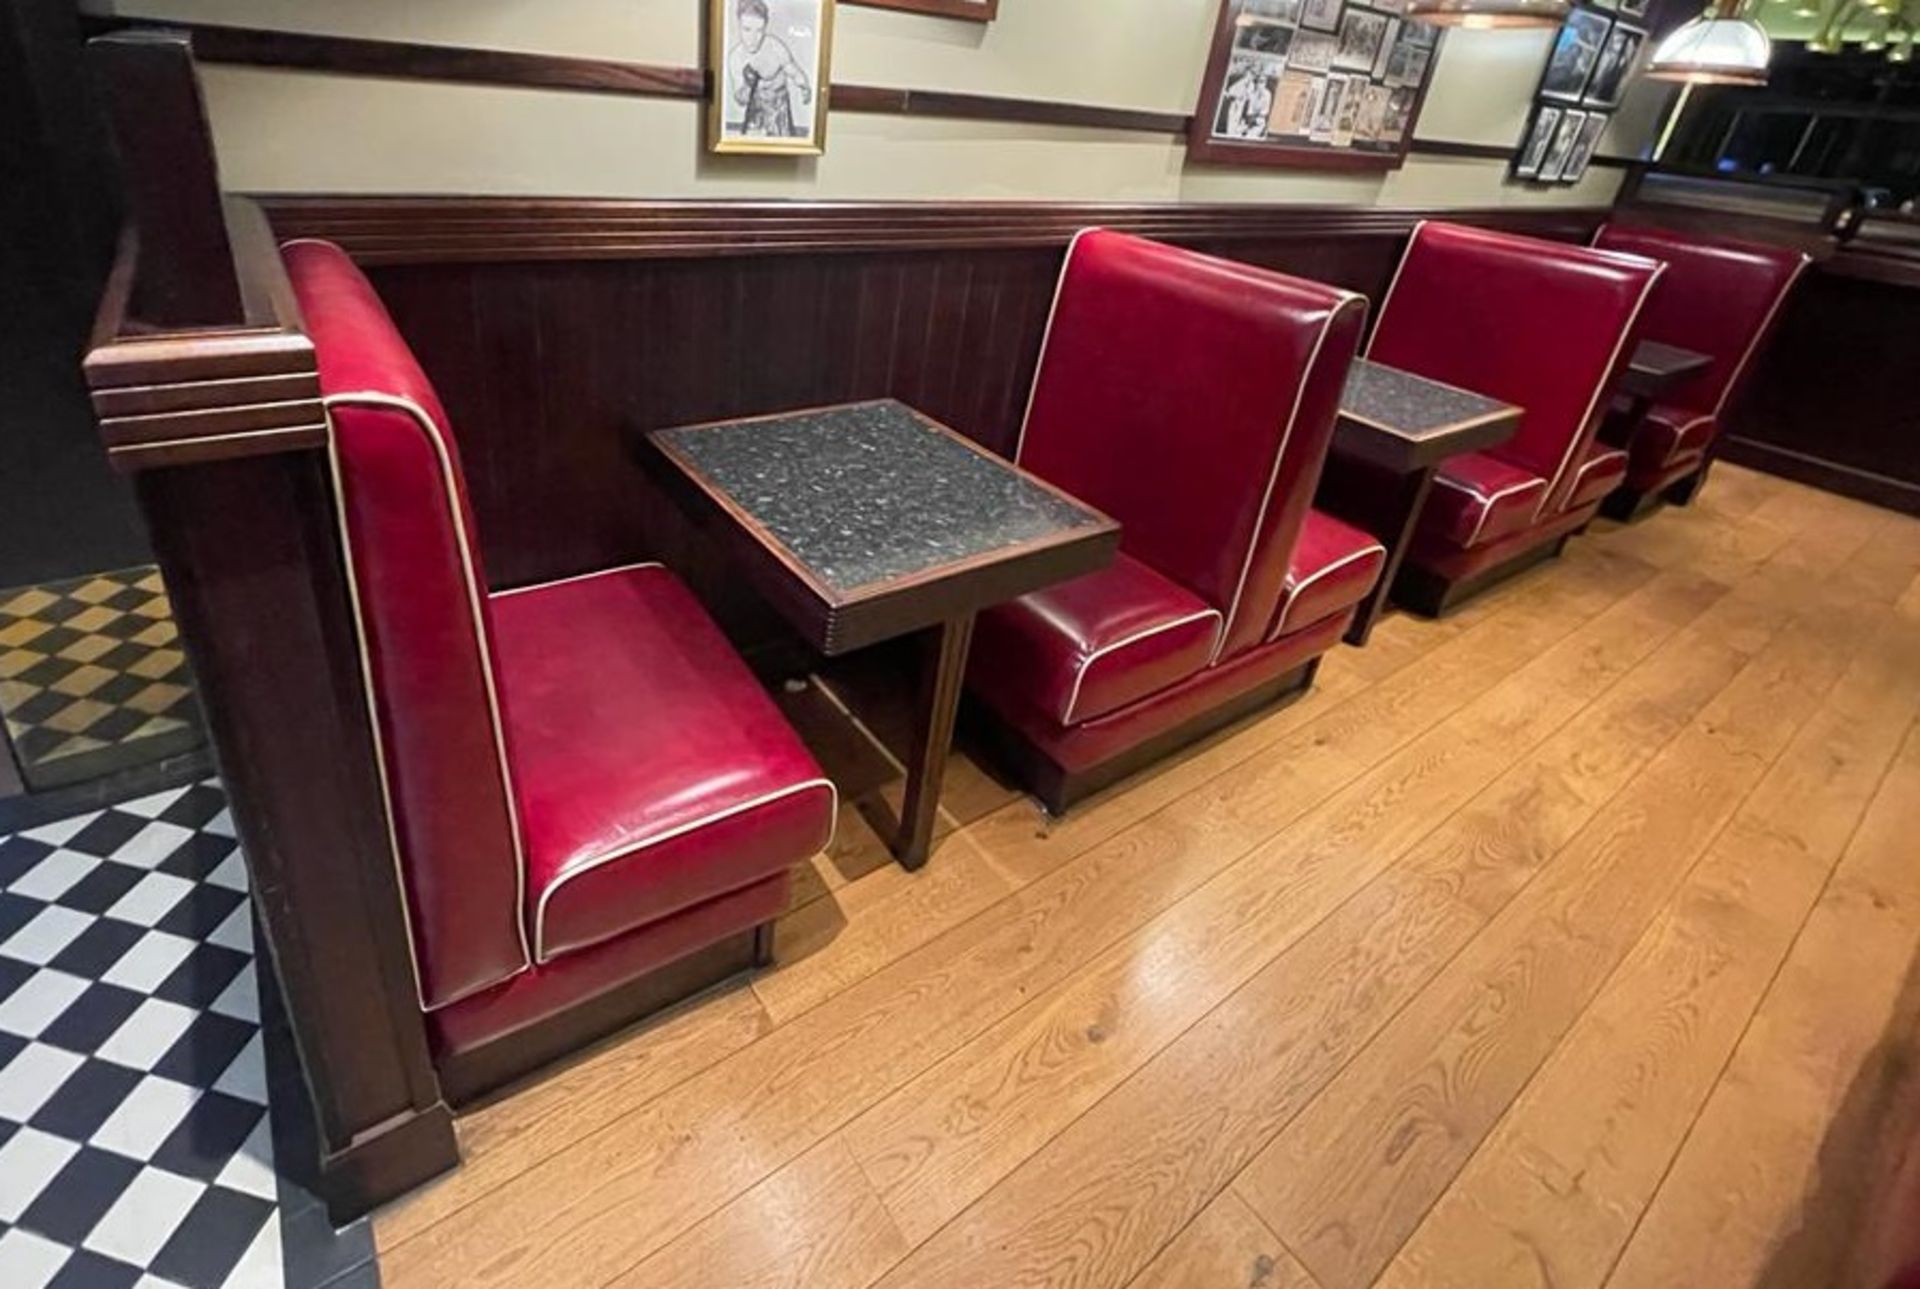 Selection of Single Seating Benches and Dining Tables to Seat Upto 6 Persons - Retro 1950's American - Image 4 of 4